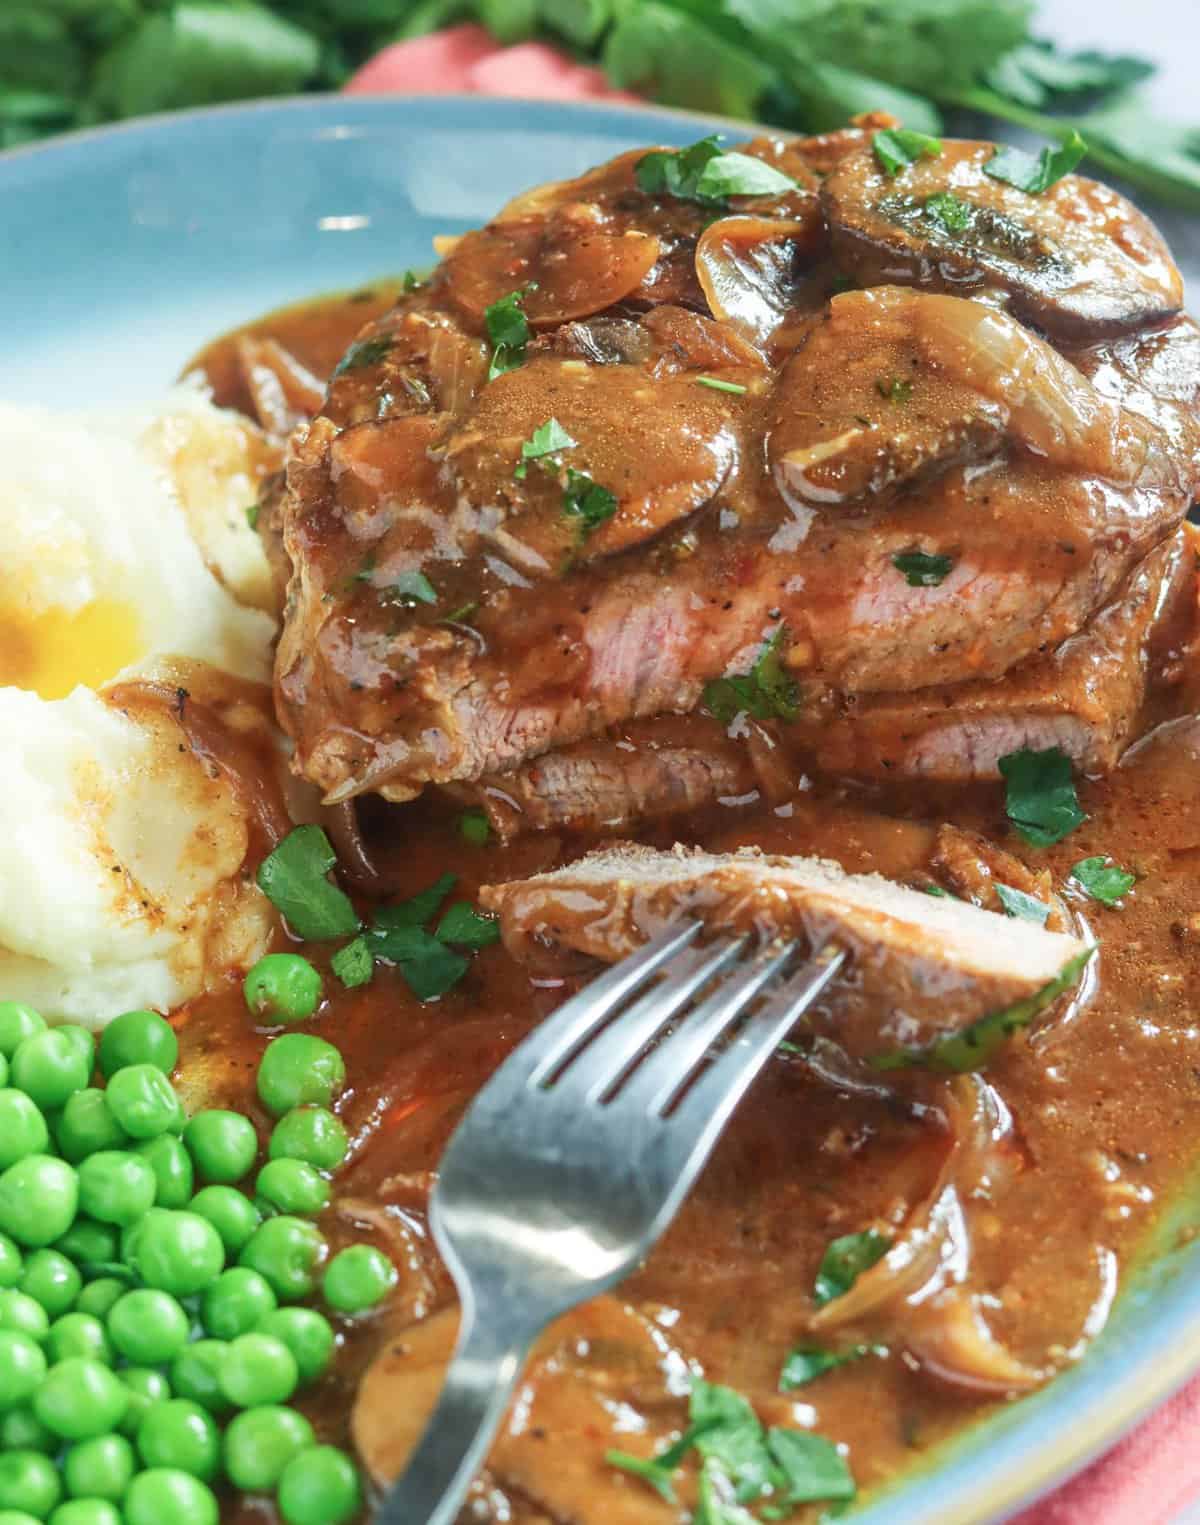 Enjoying digging into smothered steak for an easy weeknight meal